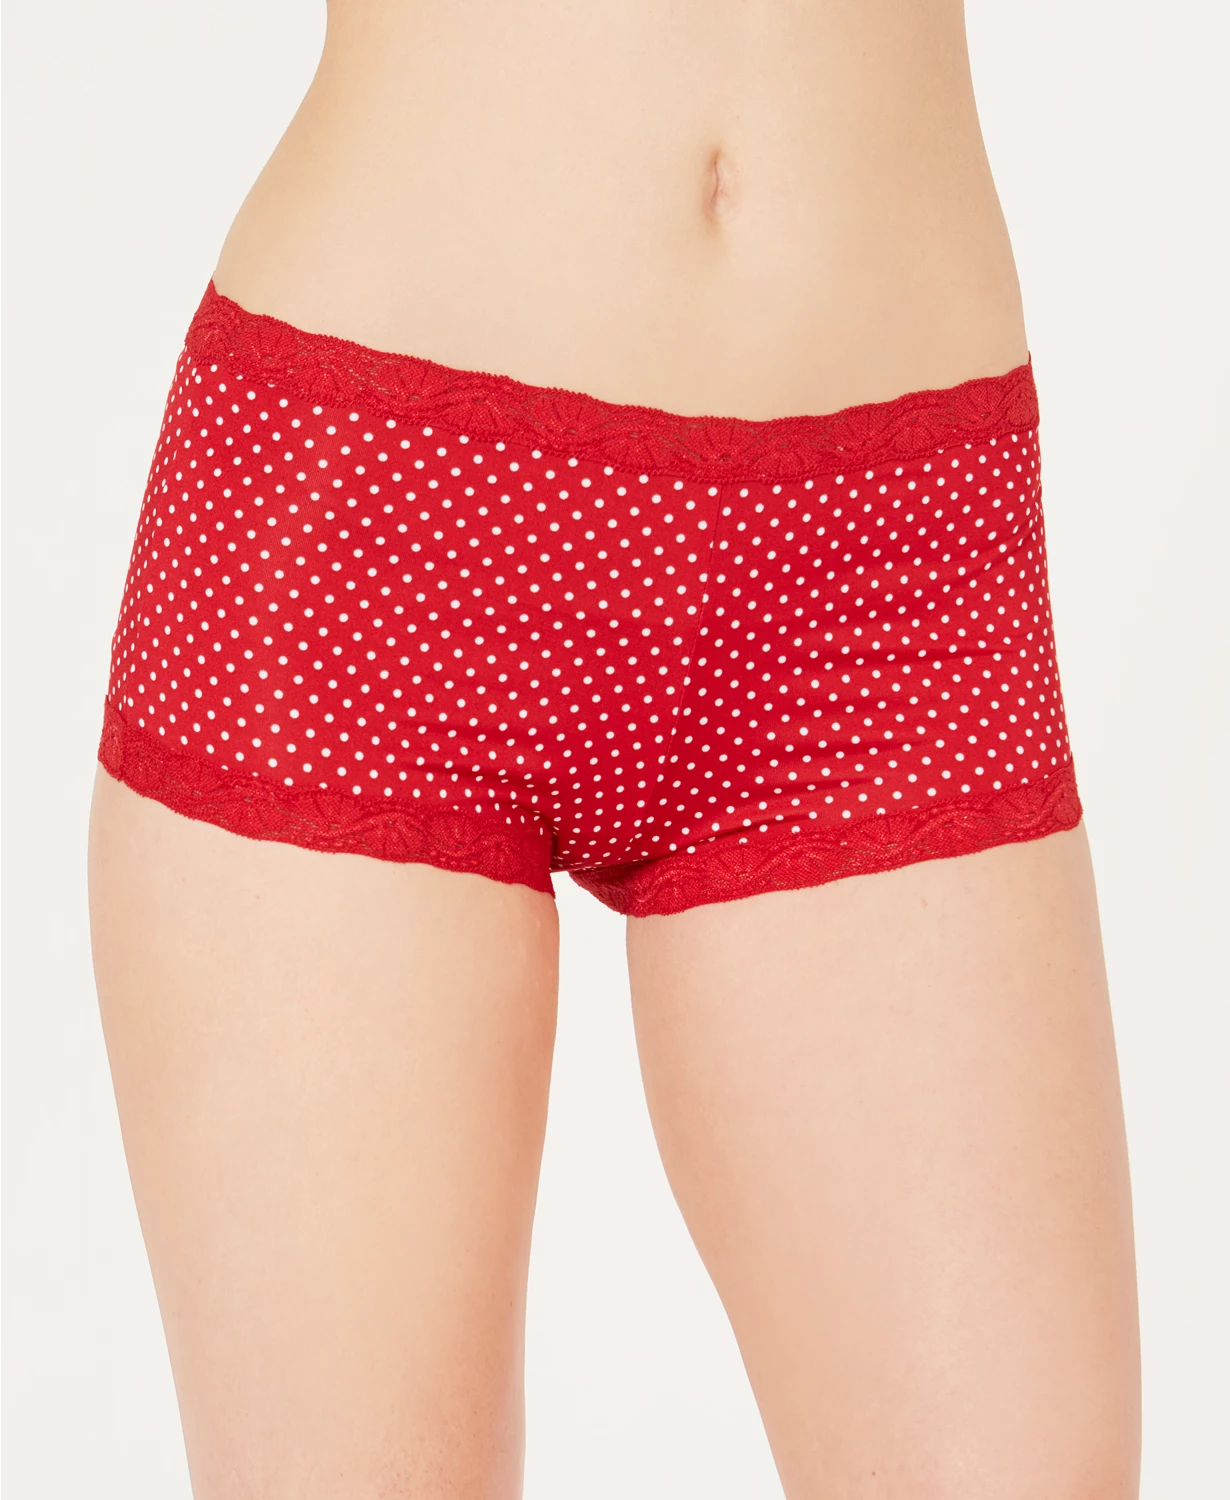 Macy’s: Maidenform Underwear are on clearance for $2.93